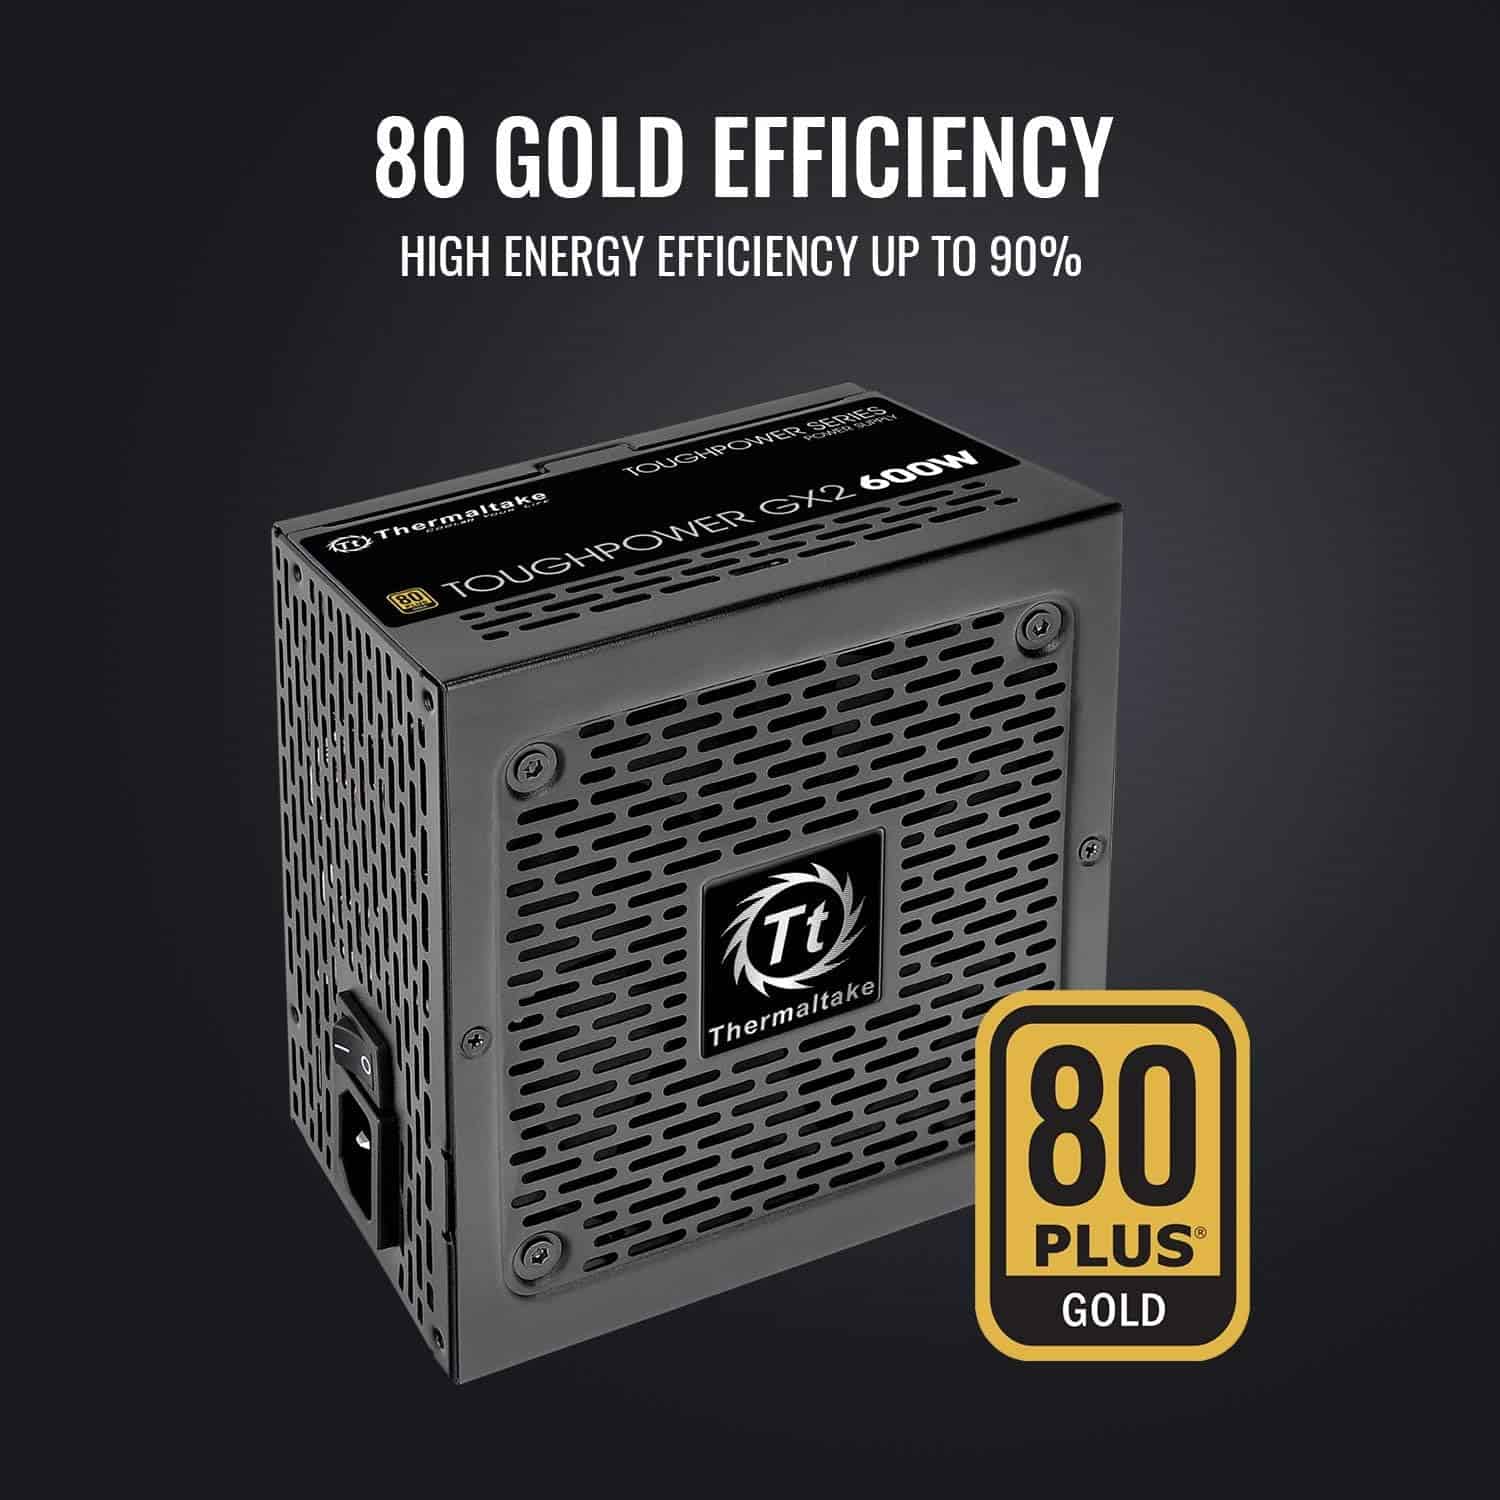 A Thermaltake Toughpower GX2 600W power supply unit with 80+ Gold efficiency, boasting up to 90% energy efficiency.